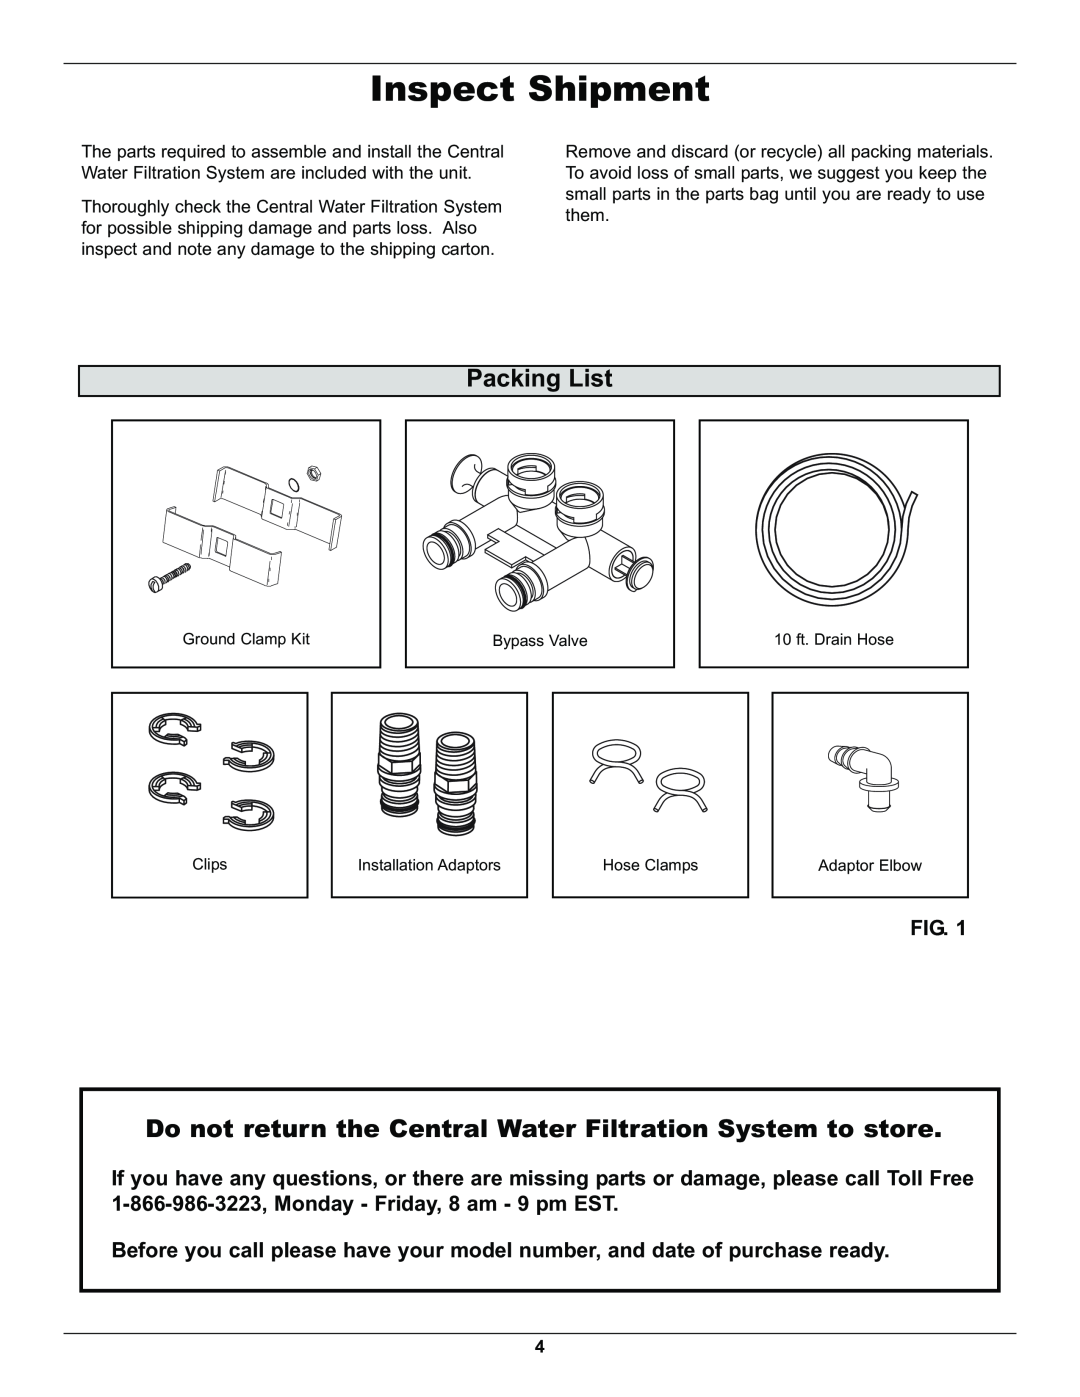 Whirlpool WHELJ1 manual Inspect Shipment, Packing List, Do not return the Central Water Filtration System to store 